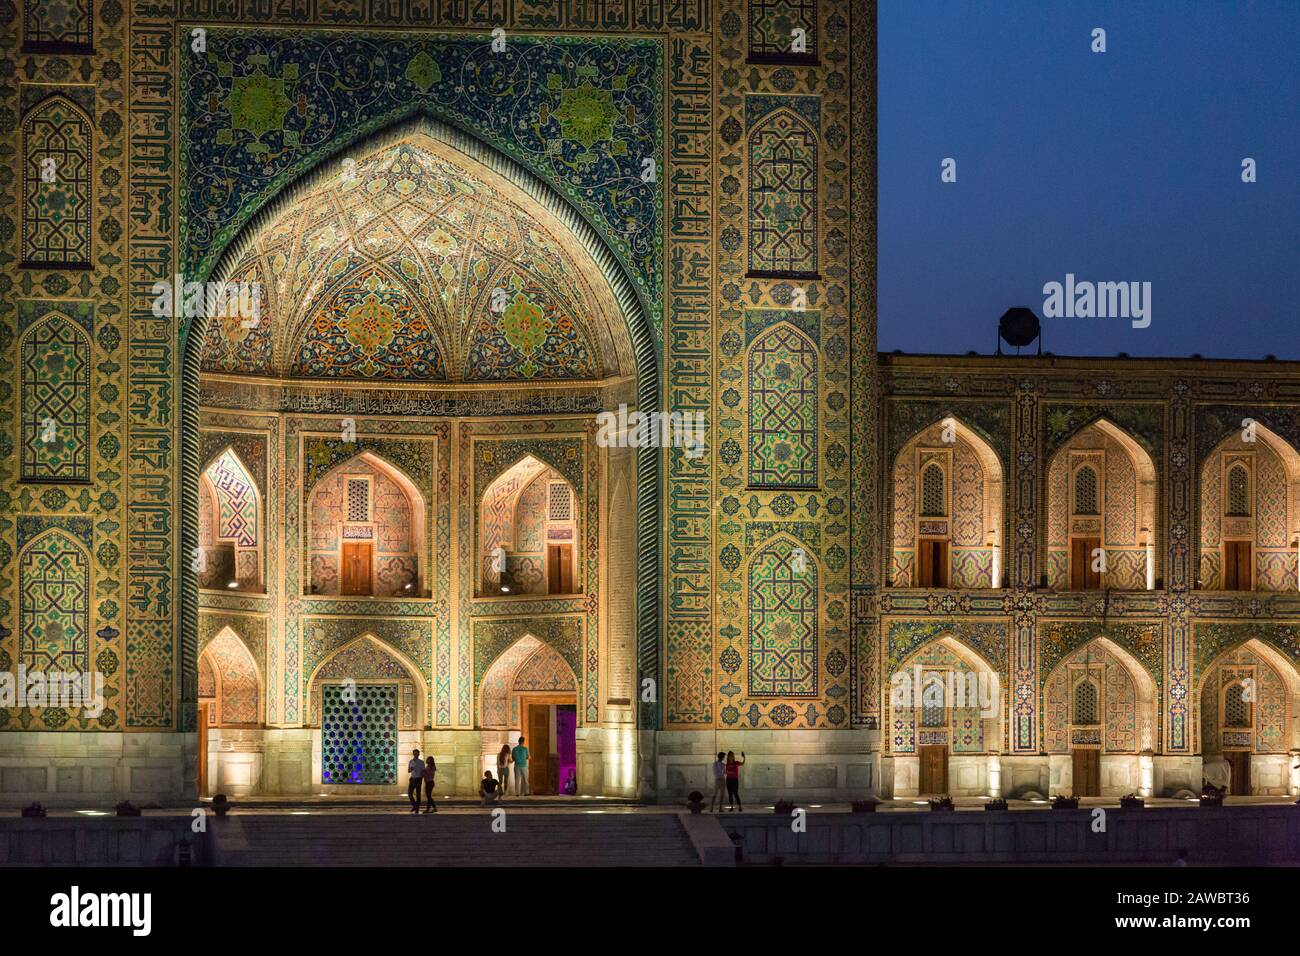 Architectural detail in ancient architecture. Usbekistan, Samarkand. Stock Photo